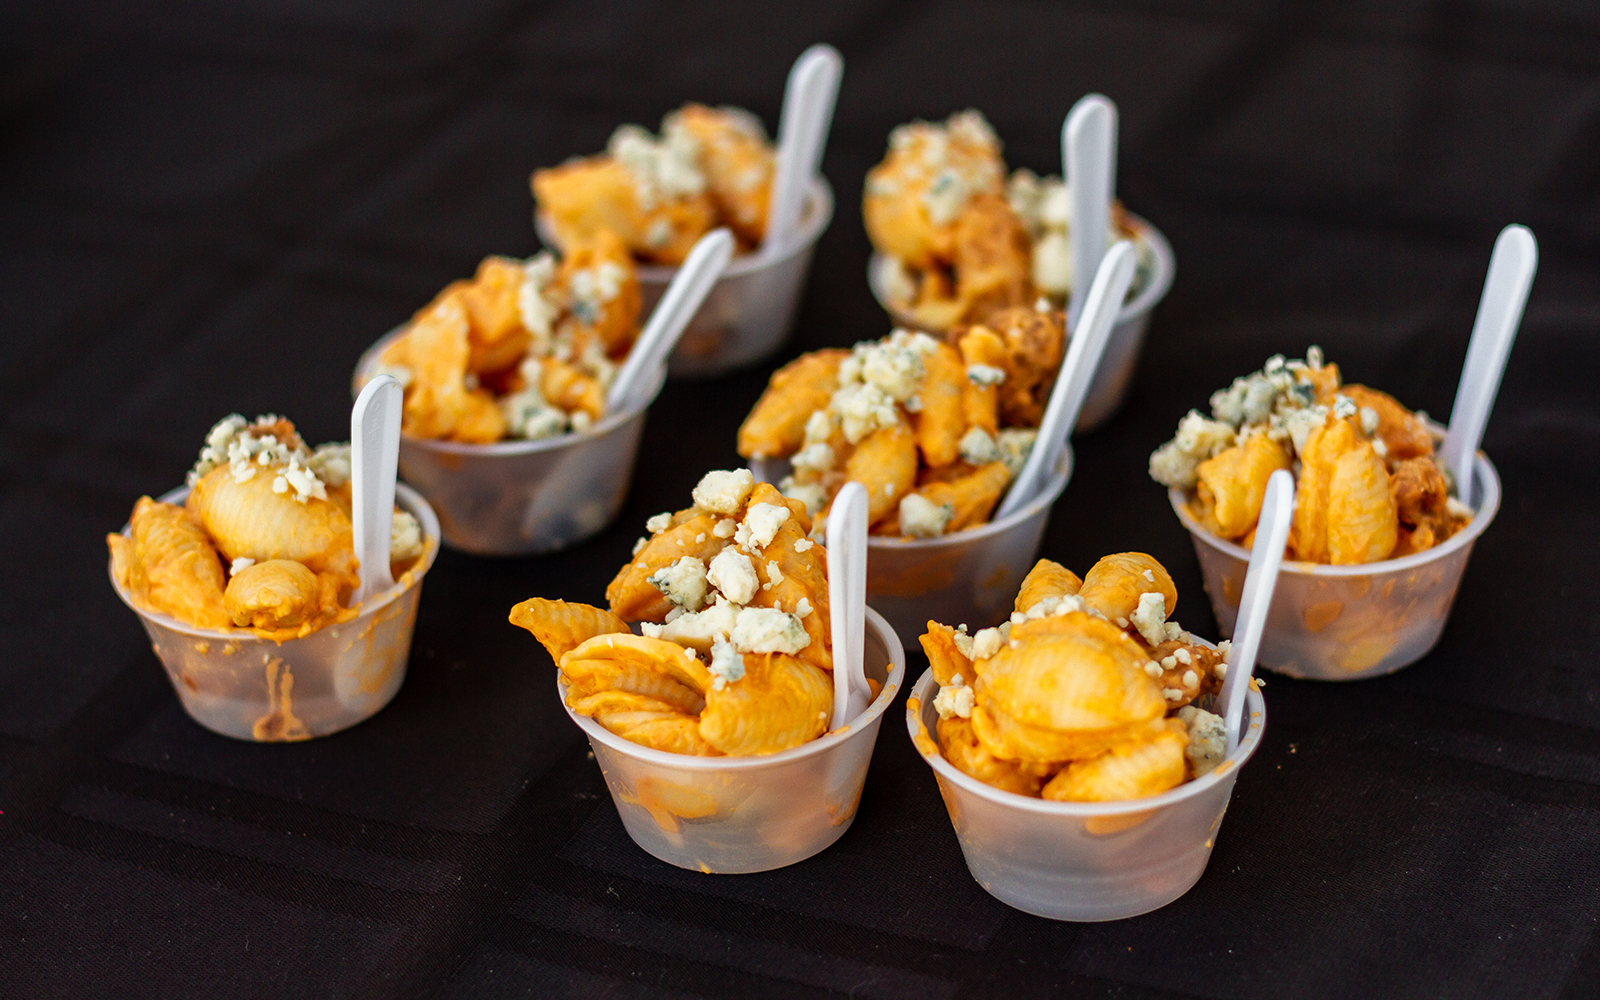 2021 Mac & Cheese Festival, Boys & Girls Club of Emerald Coast held at the Destin Commons, Frances Roy Agency, Photos by Rinn Garlanger